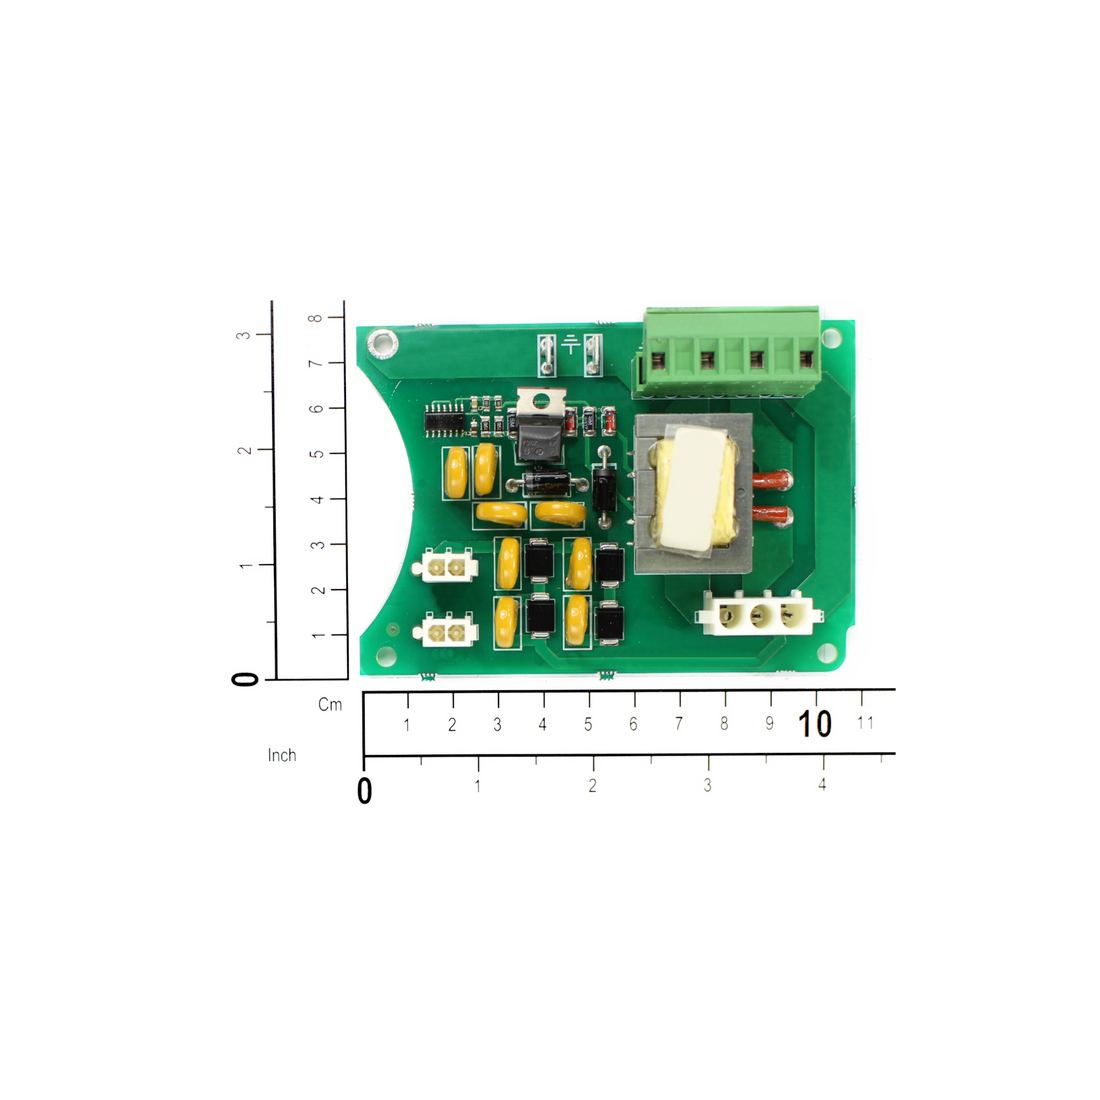 R&M Parts - Electrical Board, Part Number: 3000006068